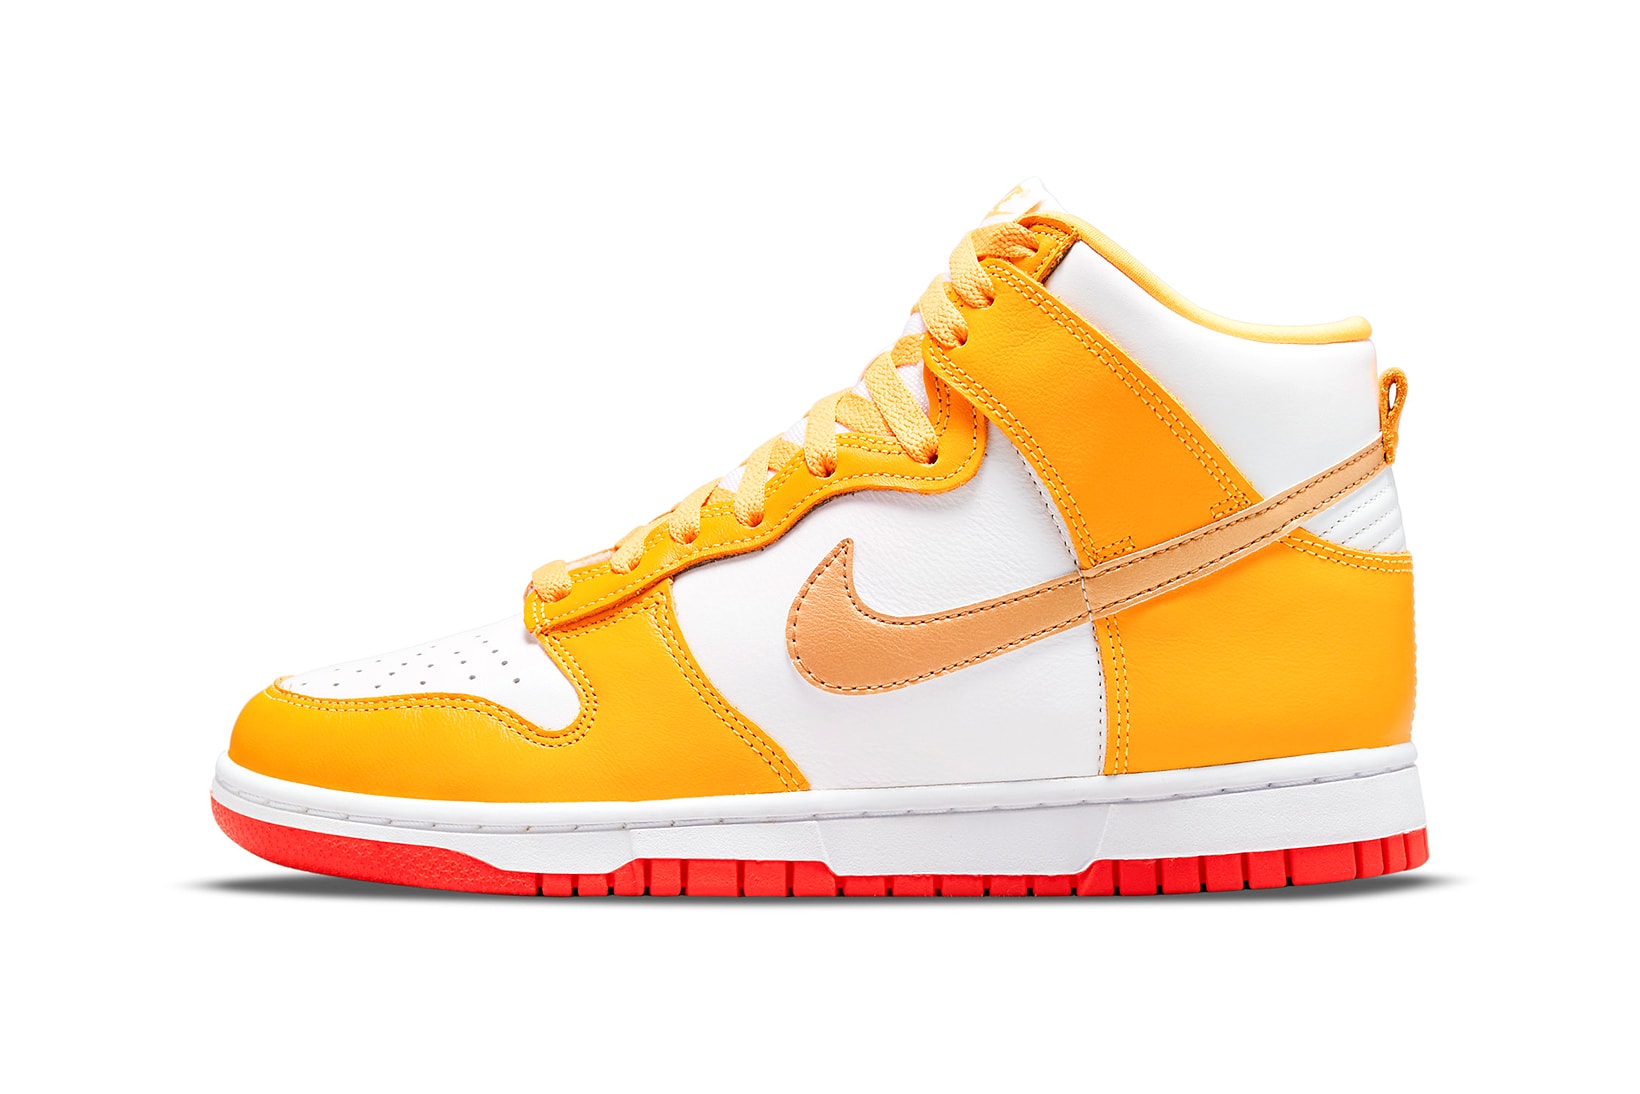 Nike Womens Dunk High University Gold Yellow White Sneakers Footwear Shoes Kicks Lateral